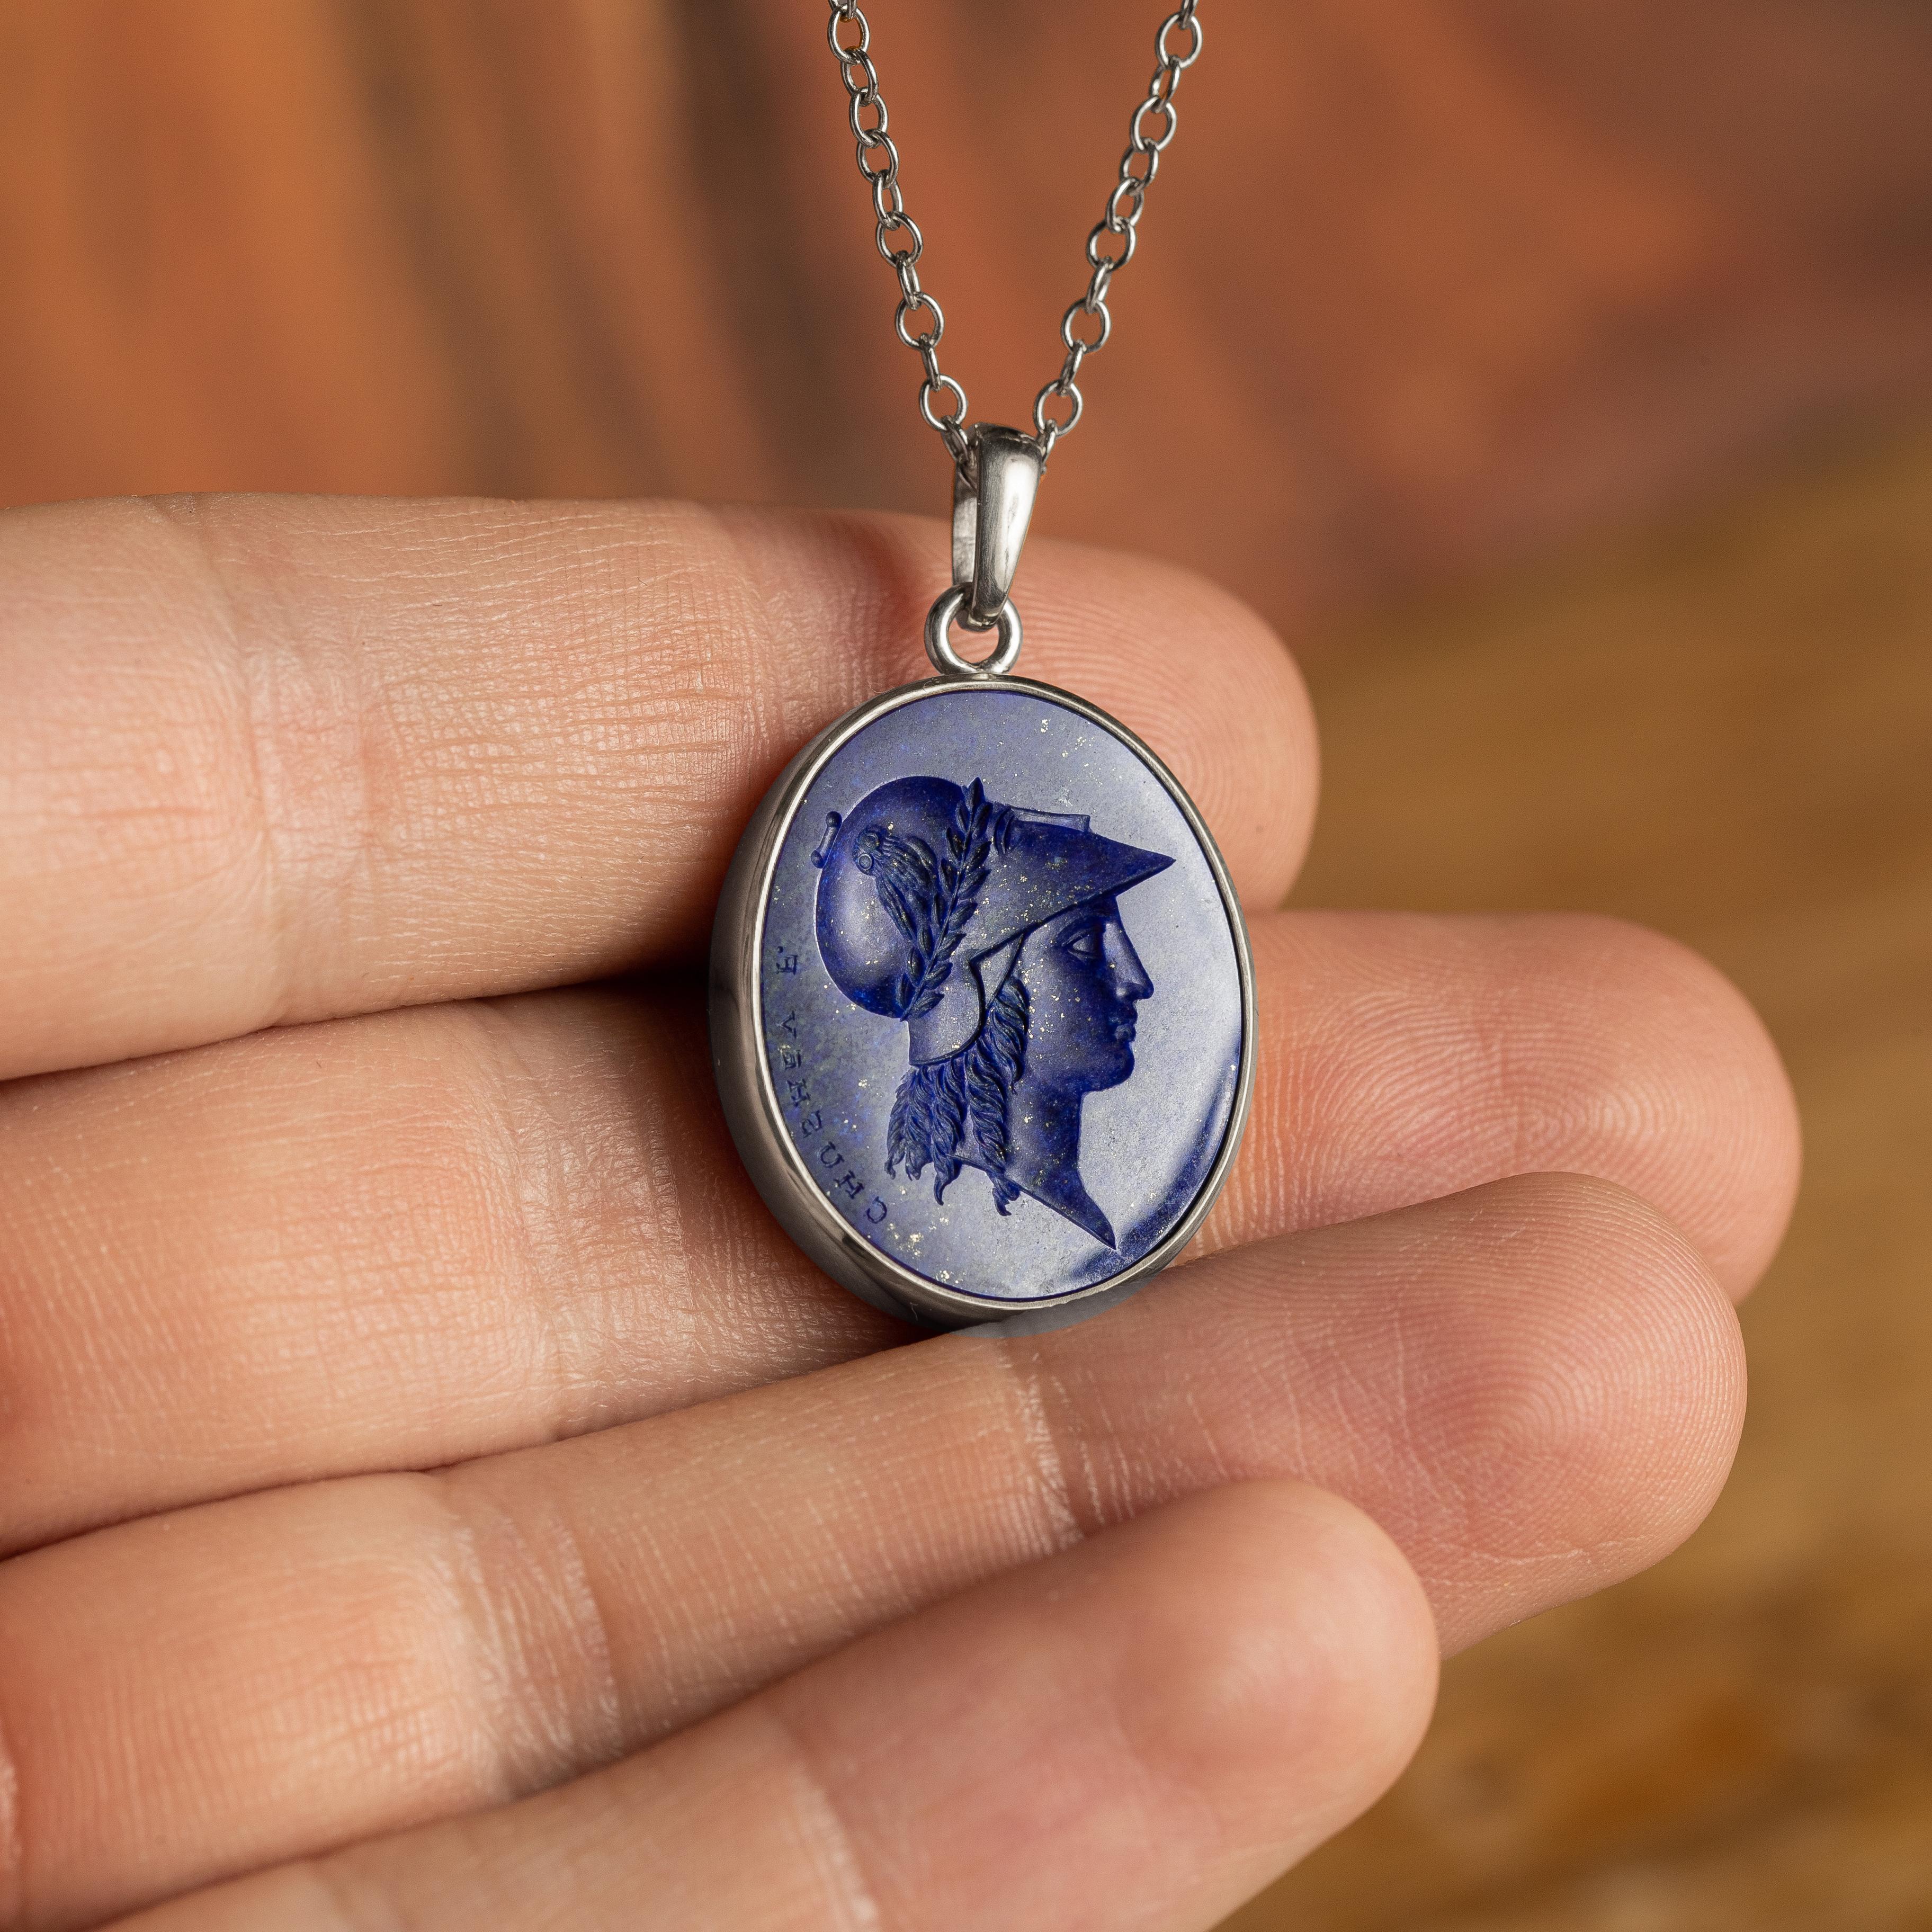 This exquisite intaglio is masterfully engraved onto lapis lazuli and features a depiction of Athena. The stone is set in a sterling silver pendant. 

Lapis lazuli is one of the most sought after stones for engraving due to its rich color, unique